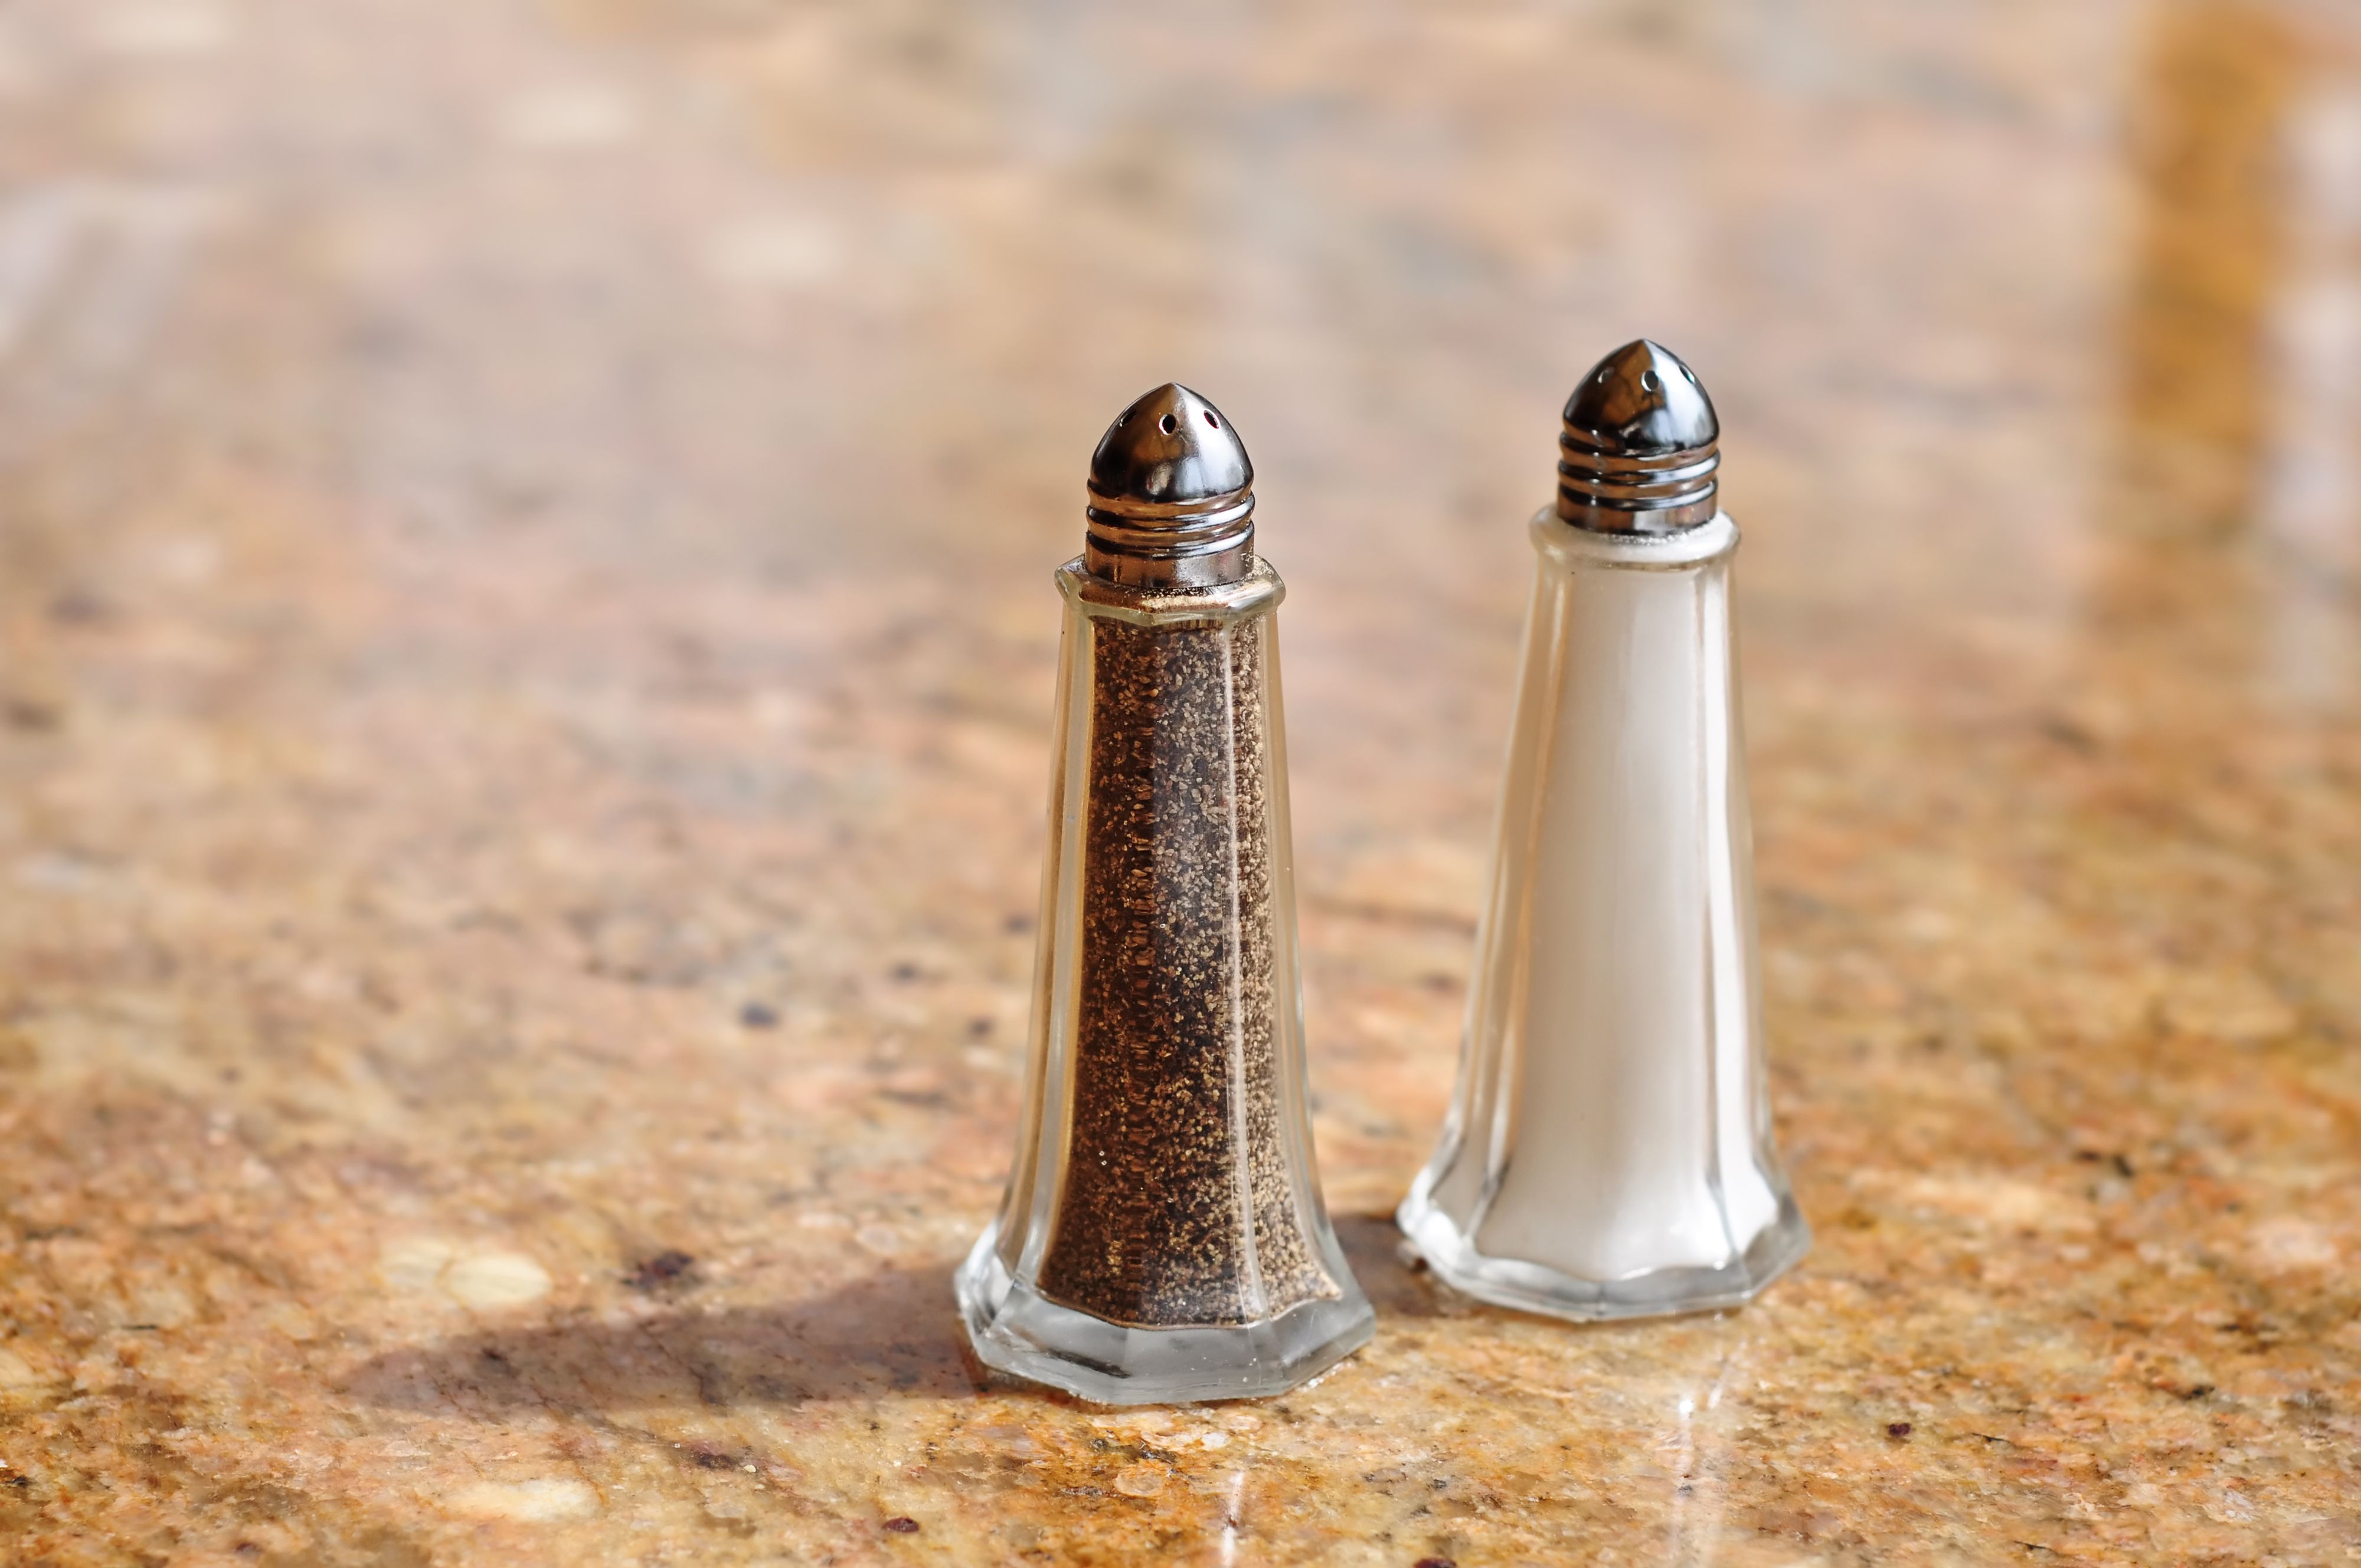 Pepper Shakers Are Super Germy - Pepper Shakers Second Dirtiest Item In  Restaurant